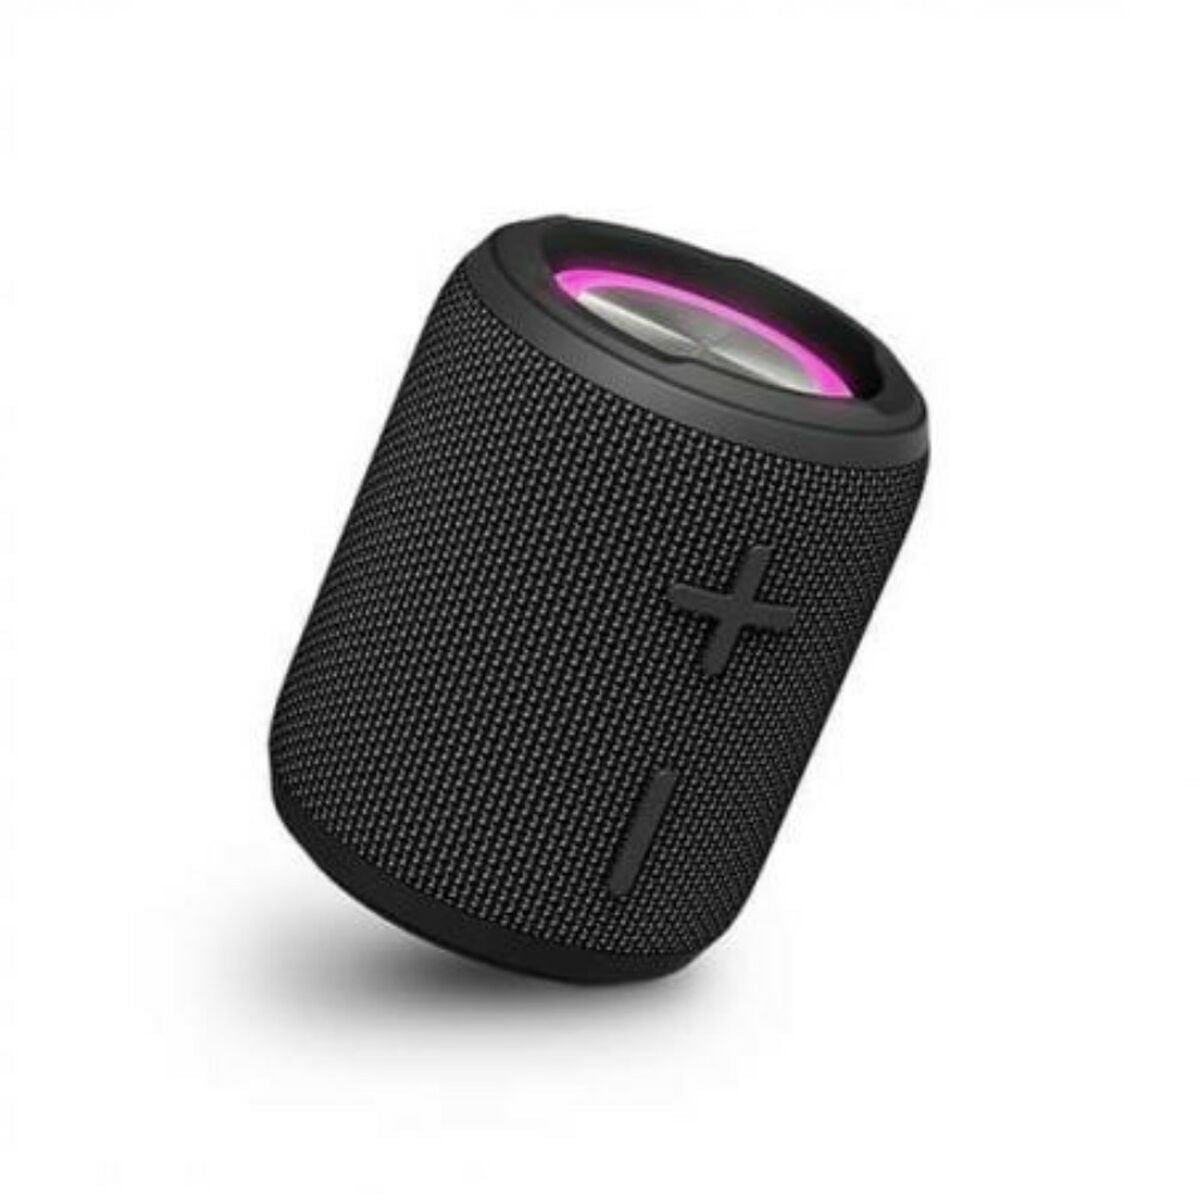 Portable Speaker SPC 4432N 14W Black, SPC, Electronics, Portable audio and video, portable-speaker-spc-4432n-14w-black, Brand_SPC, category-reference-2609, category-reference-2882, category-reference-2923, category-reference-t-1938, category-reference-t-1939, category-reference-t-1940, category-reference-t-19653, Condition_NEW, entertainment, music, Price_50 - 100, RiotNook